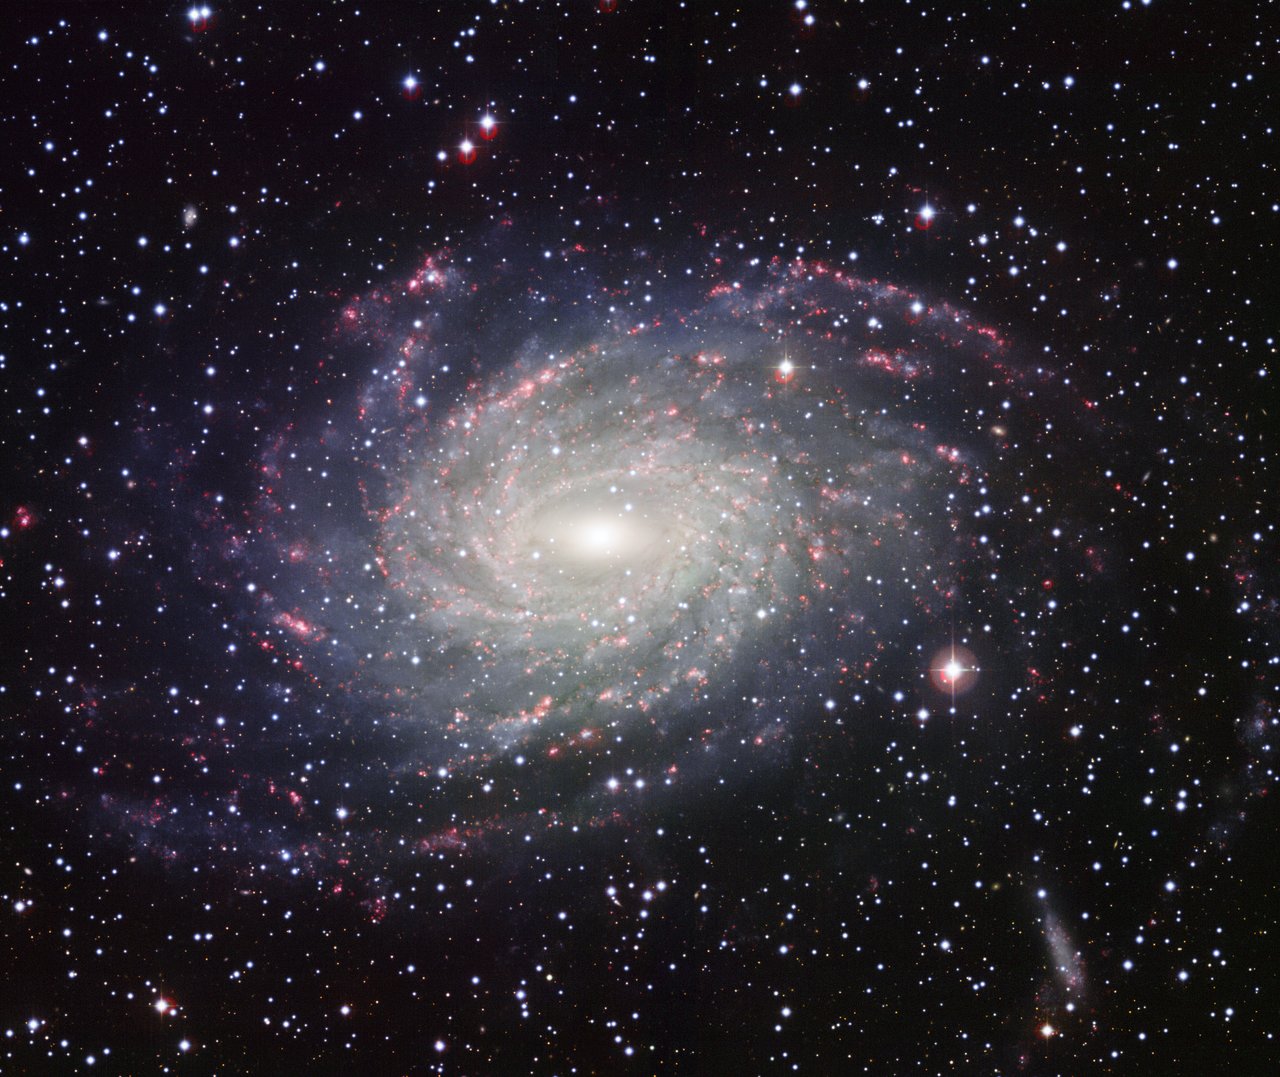 NGC 6744, a galaxy very similar to the Milky Way